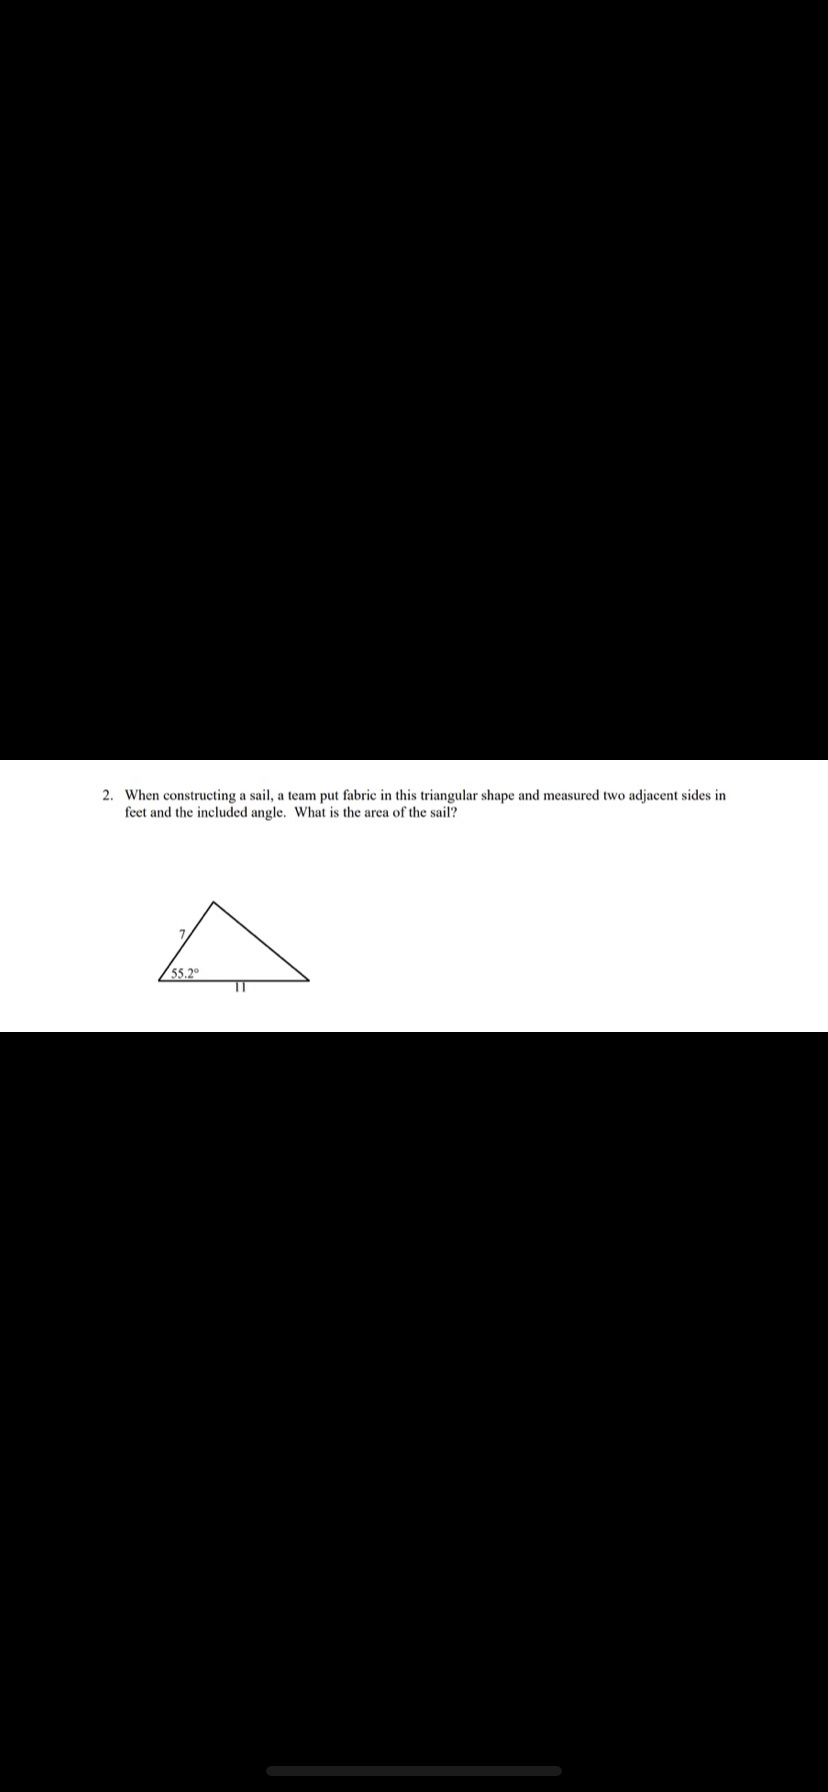 2. When constructing a sail, a team put fabric in this triangular shape and measured two adjacent sides in
feet and the included angle. What is the area of the sail?
/55.2
